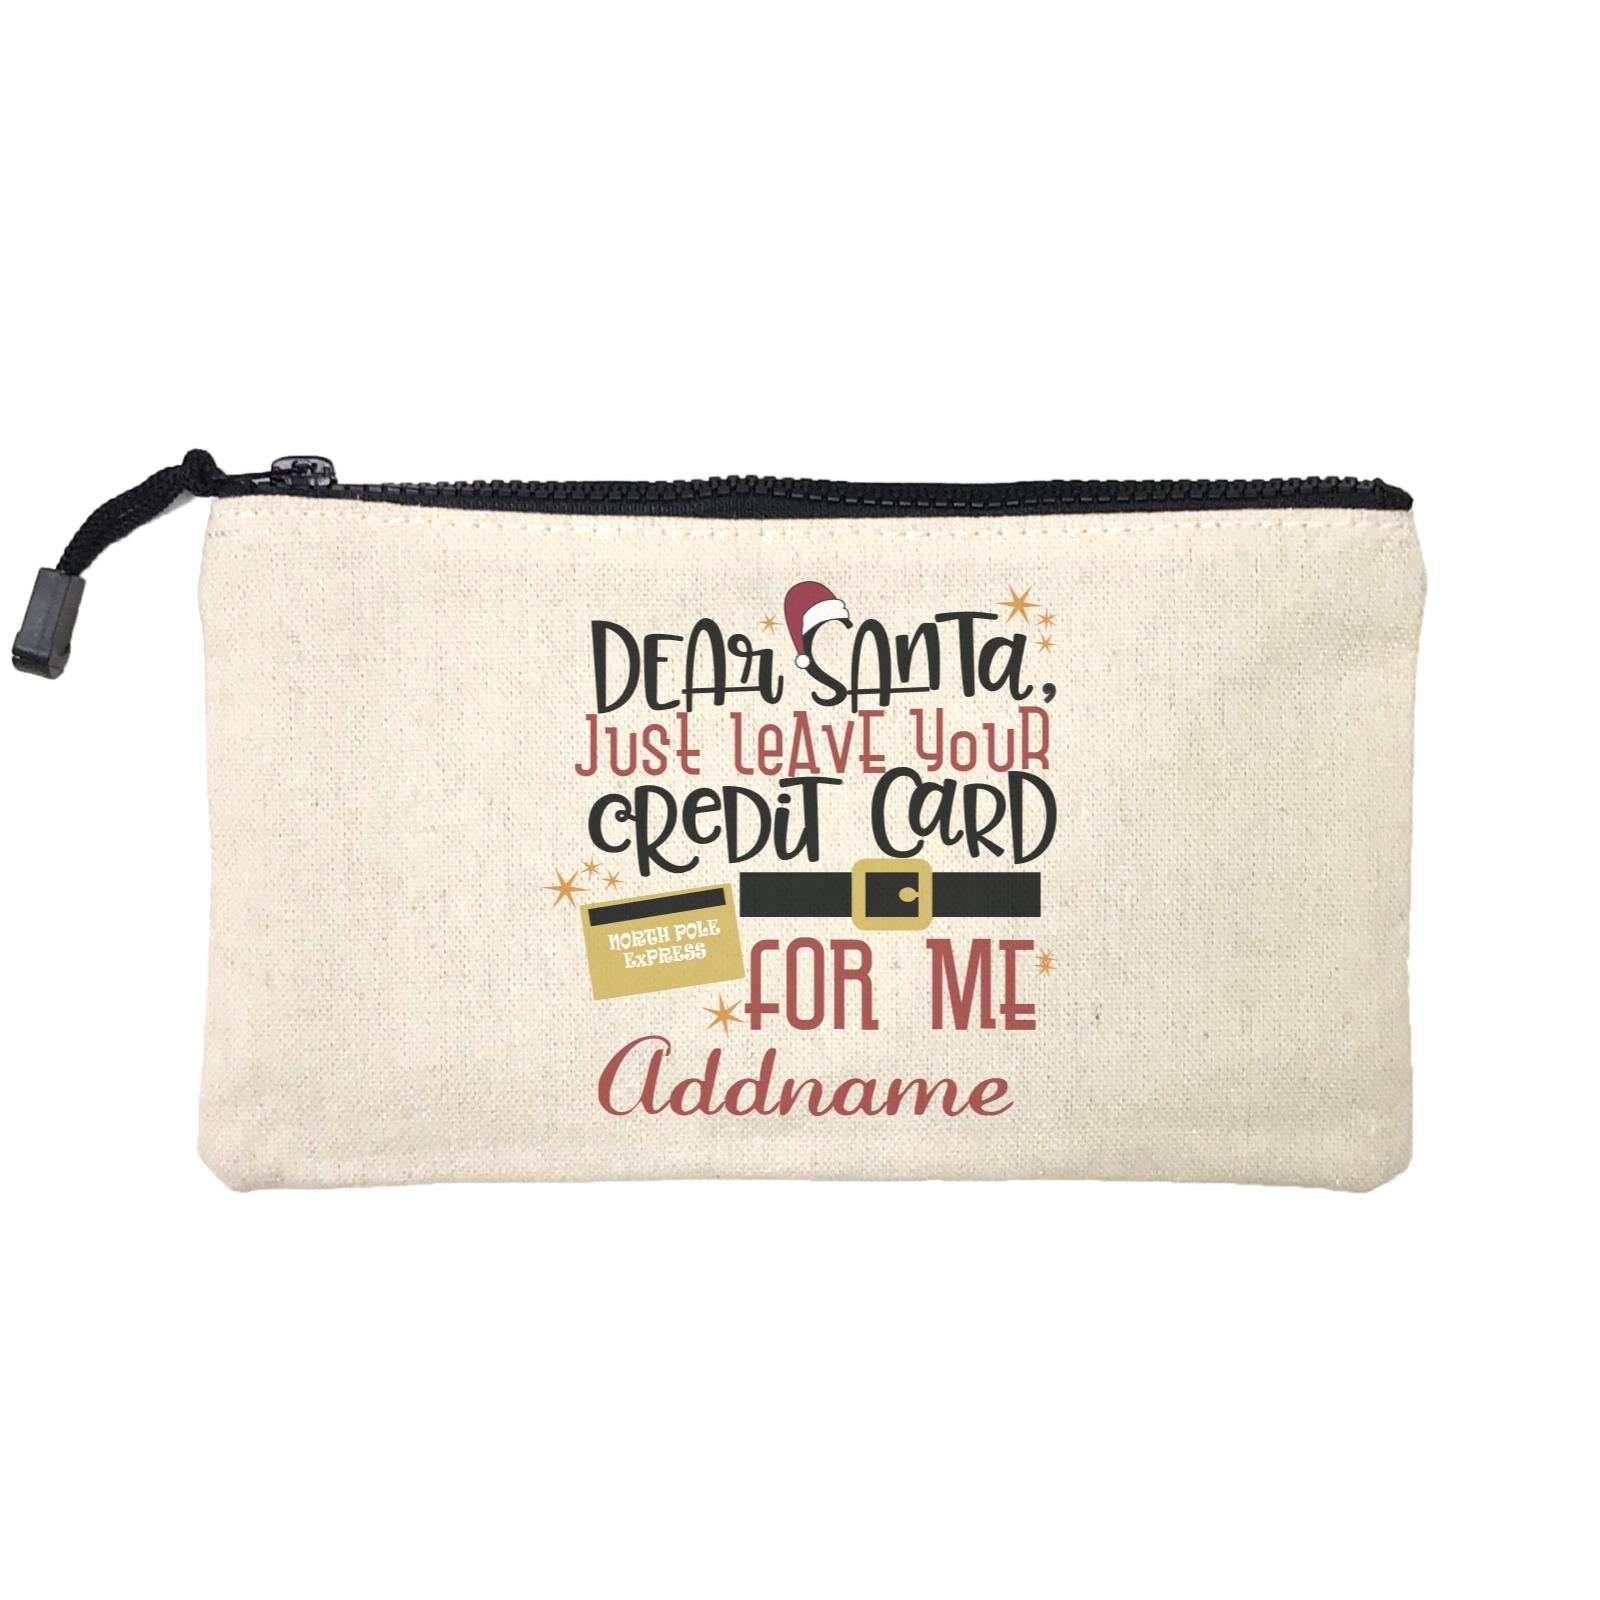 Xmas Dear Santa Just Leave Your Credit Card For Me Mini Accessories Stationery Pouch